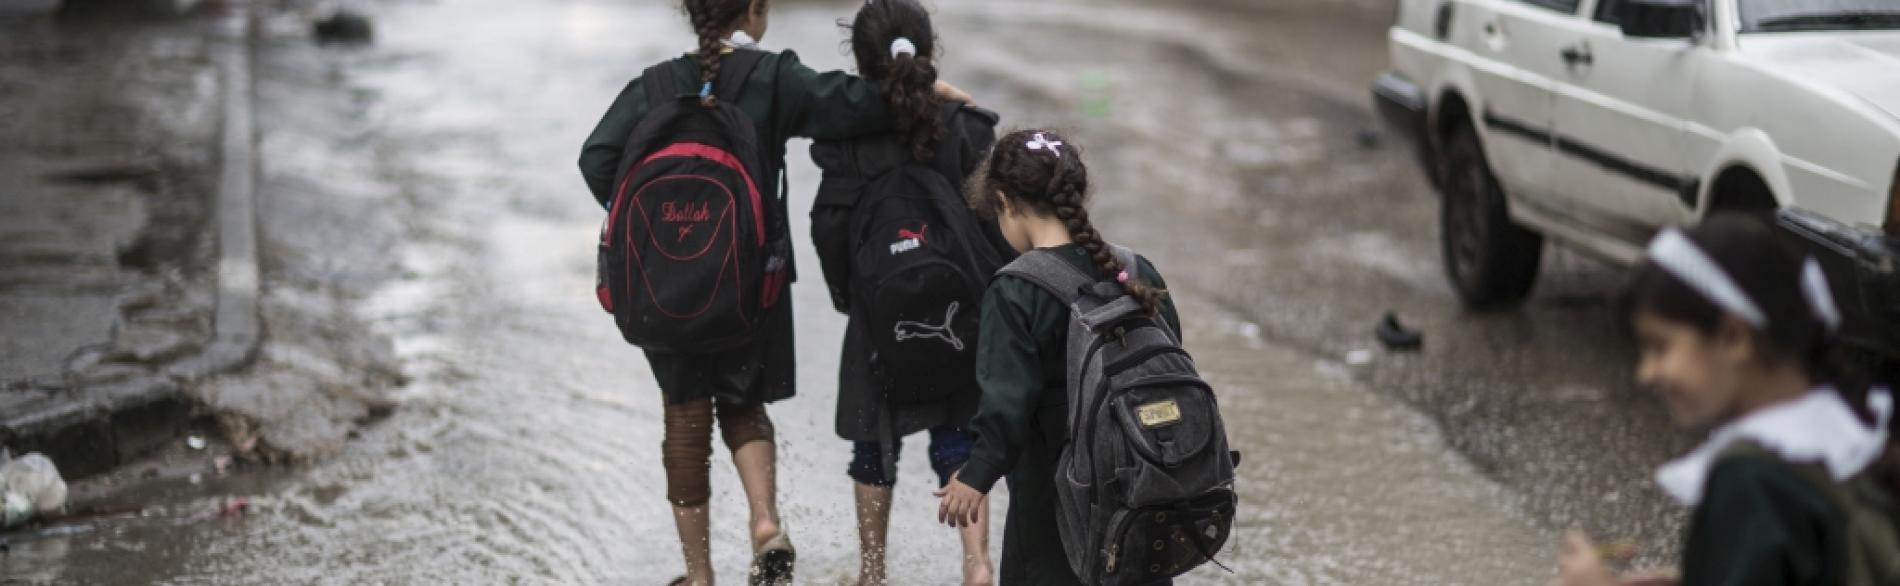 Children on their way back from school, during floods in Gaza city, January 2015. © Photo by Wissam Nassar